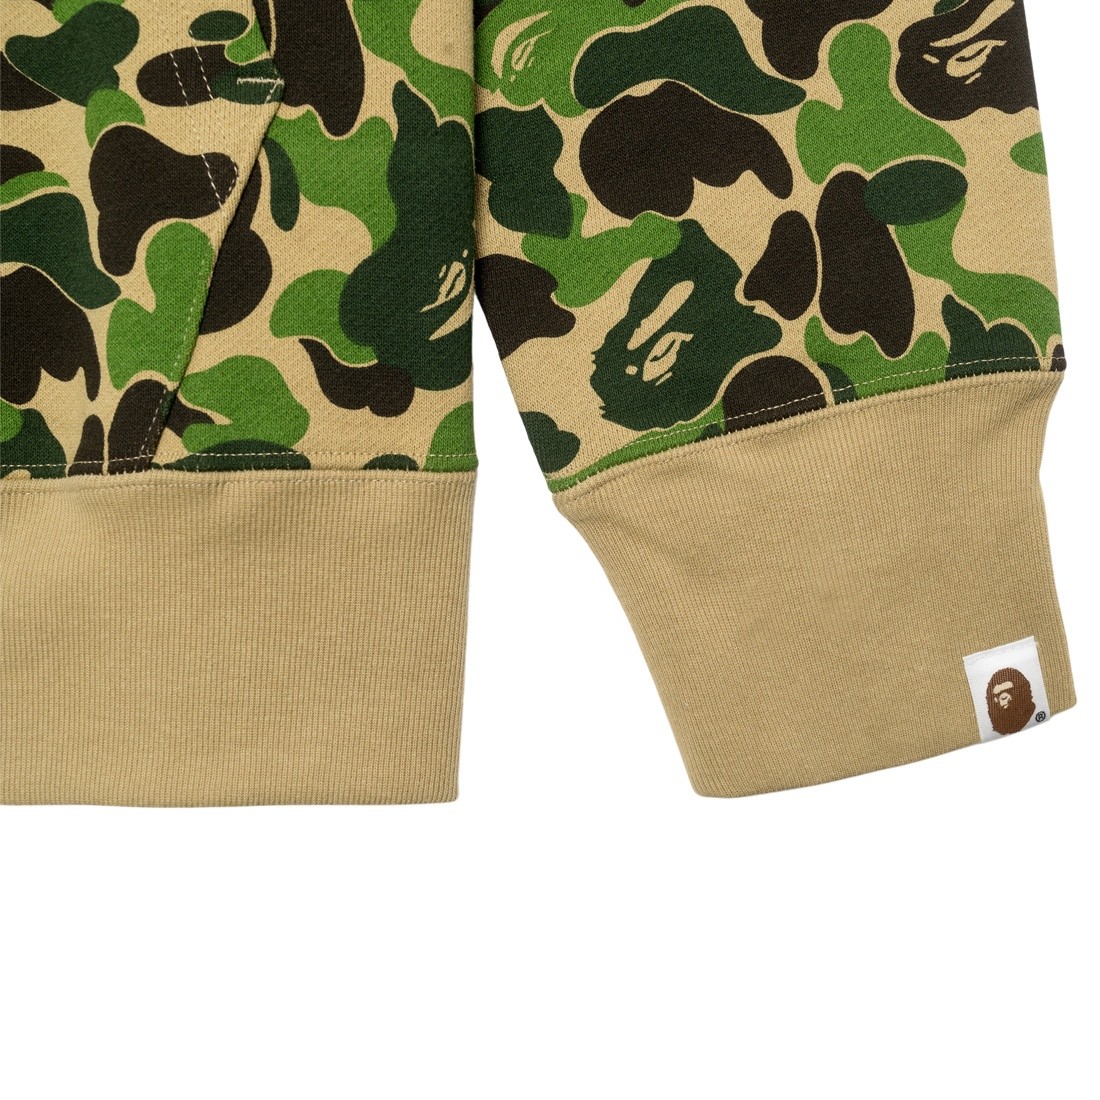 A Bathing Ape Men ABC Camo 2nd Ape Wide Pullover Hoodie green